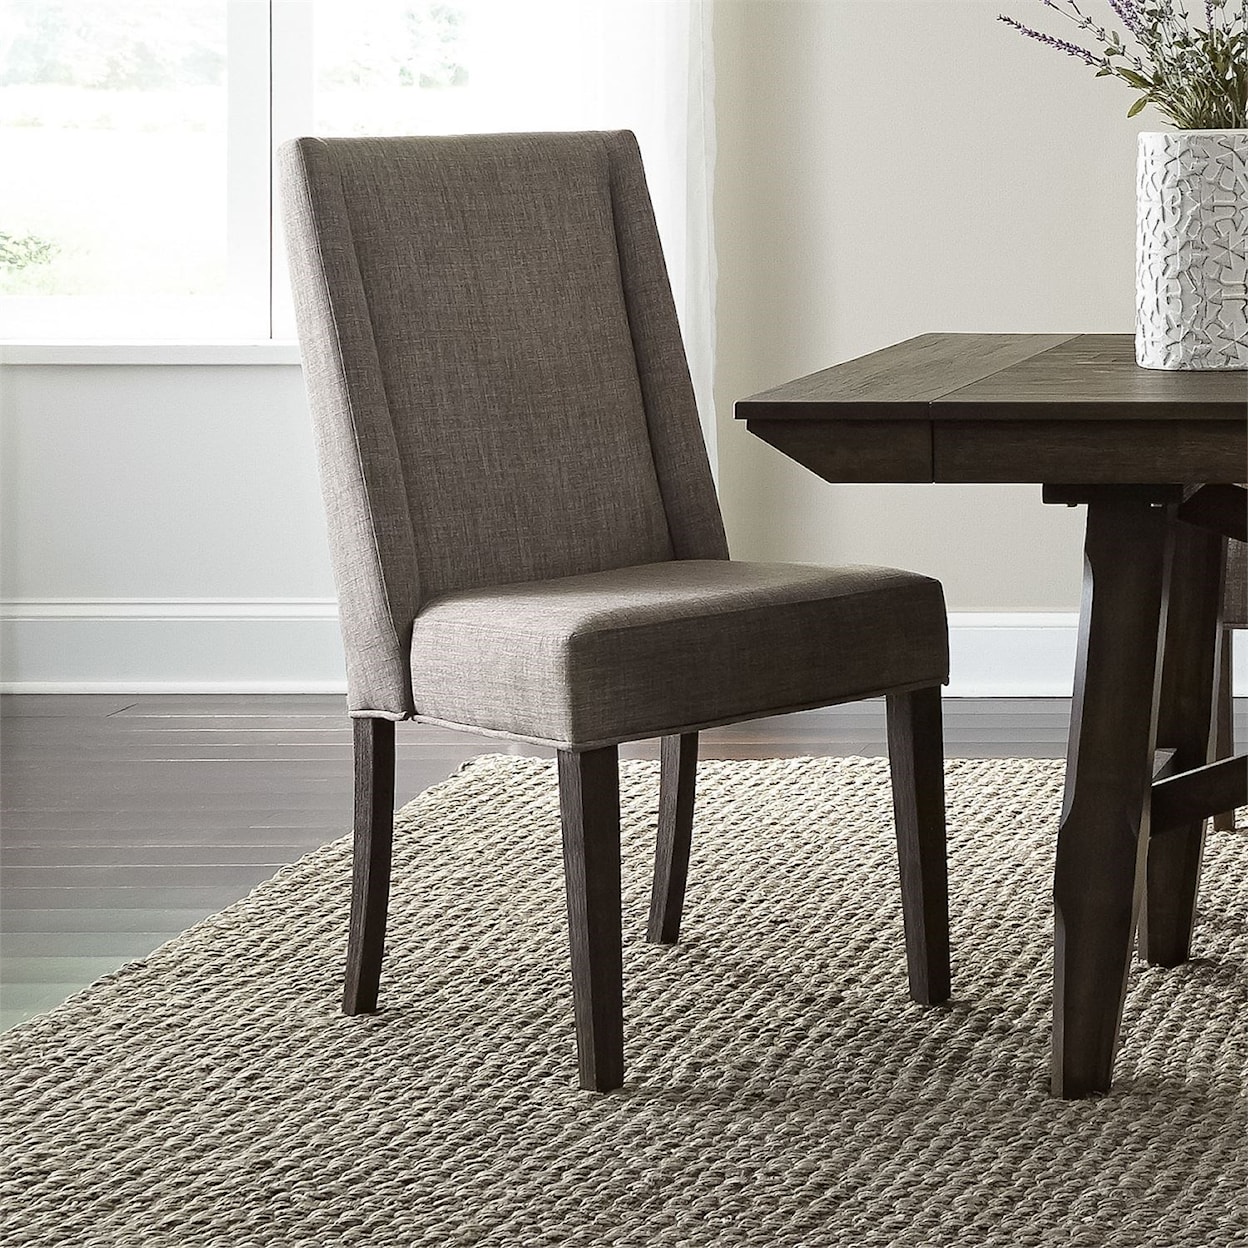 Libby Double Bridge Upholstered Dining Side Chair